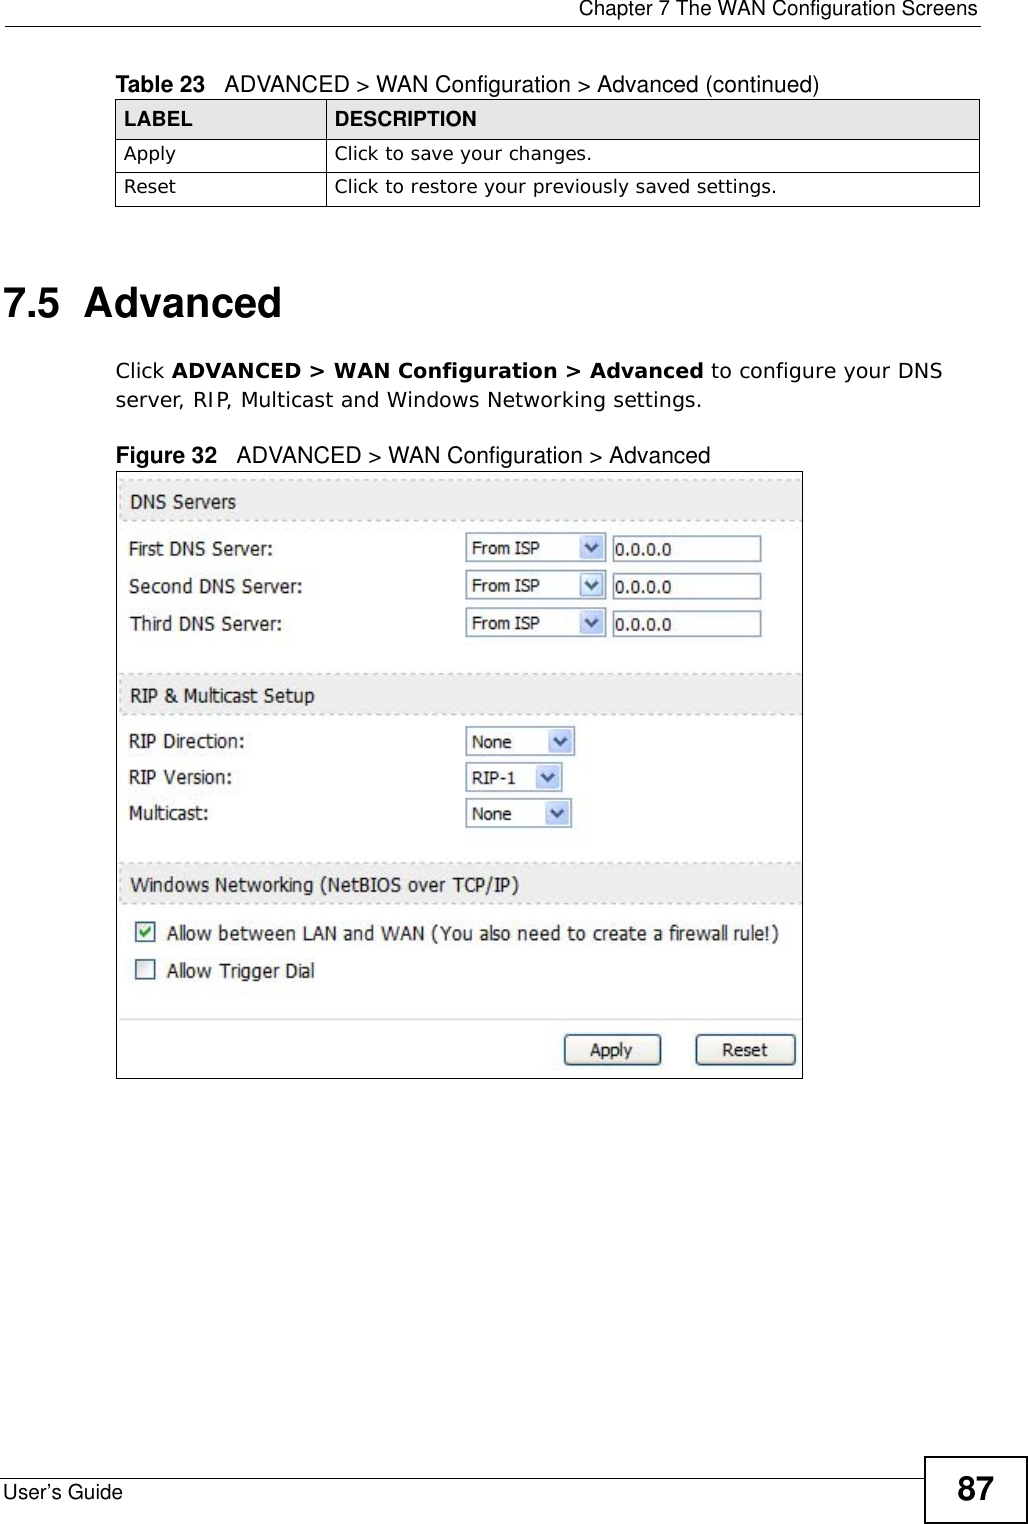  Chapter 7 The WAN Configuration ScreensUser’s Guide 877.5  AdvancedClick ADVANCED &gt; WAN Configuration &gt; Advanced to configure your DNS server, RIP, Multicast and Windows Networking settings.Figure 32   ADVANCED &gt; WAN Configuration &gt; Advanced     Apply Click to save your changes.Reset Click to restore your previously saved settings.Table 23   ADVANCED &gt; WAN Configuration &gt; Advanced (continued)LABEL DESCRIPTION